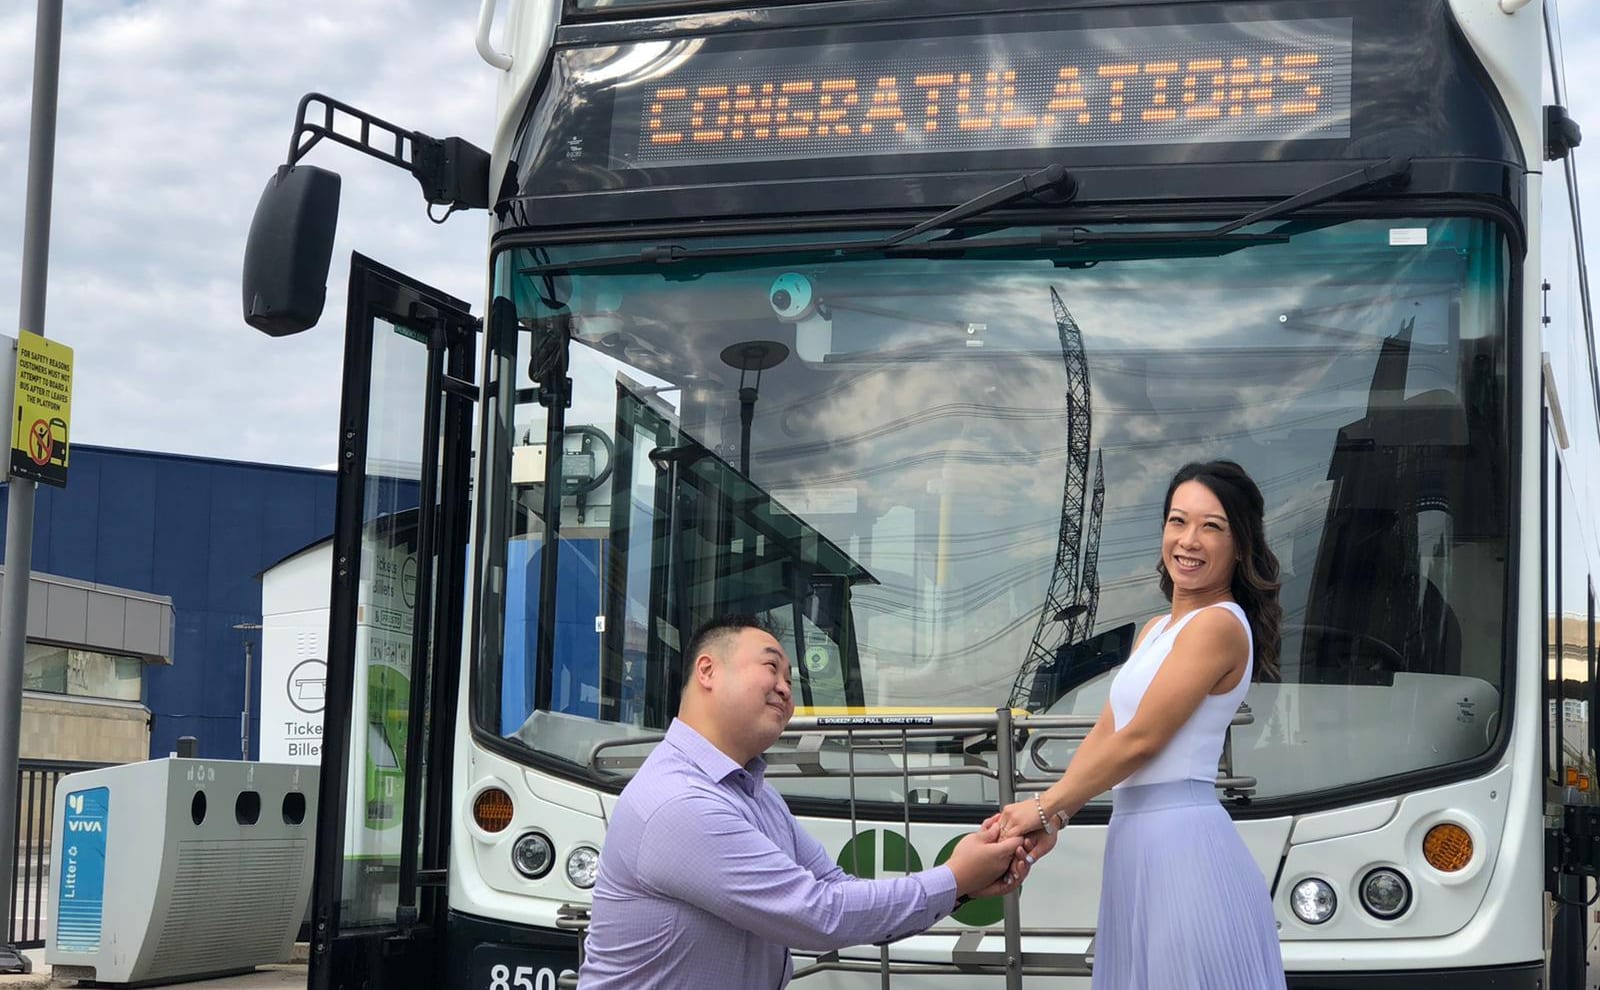 Love on the GO: How one Toronto-area couple connected on the bus